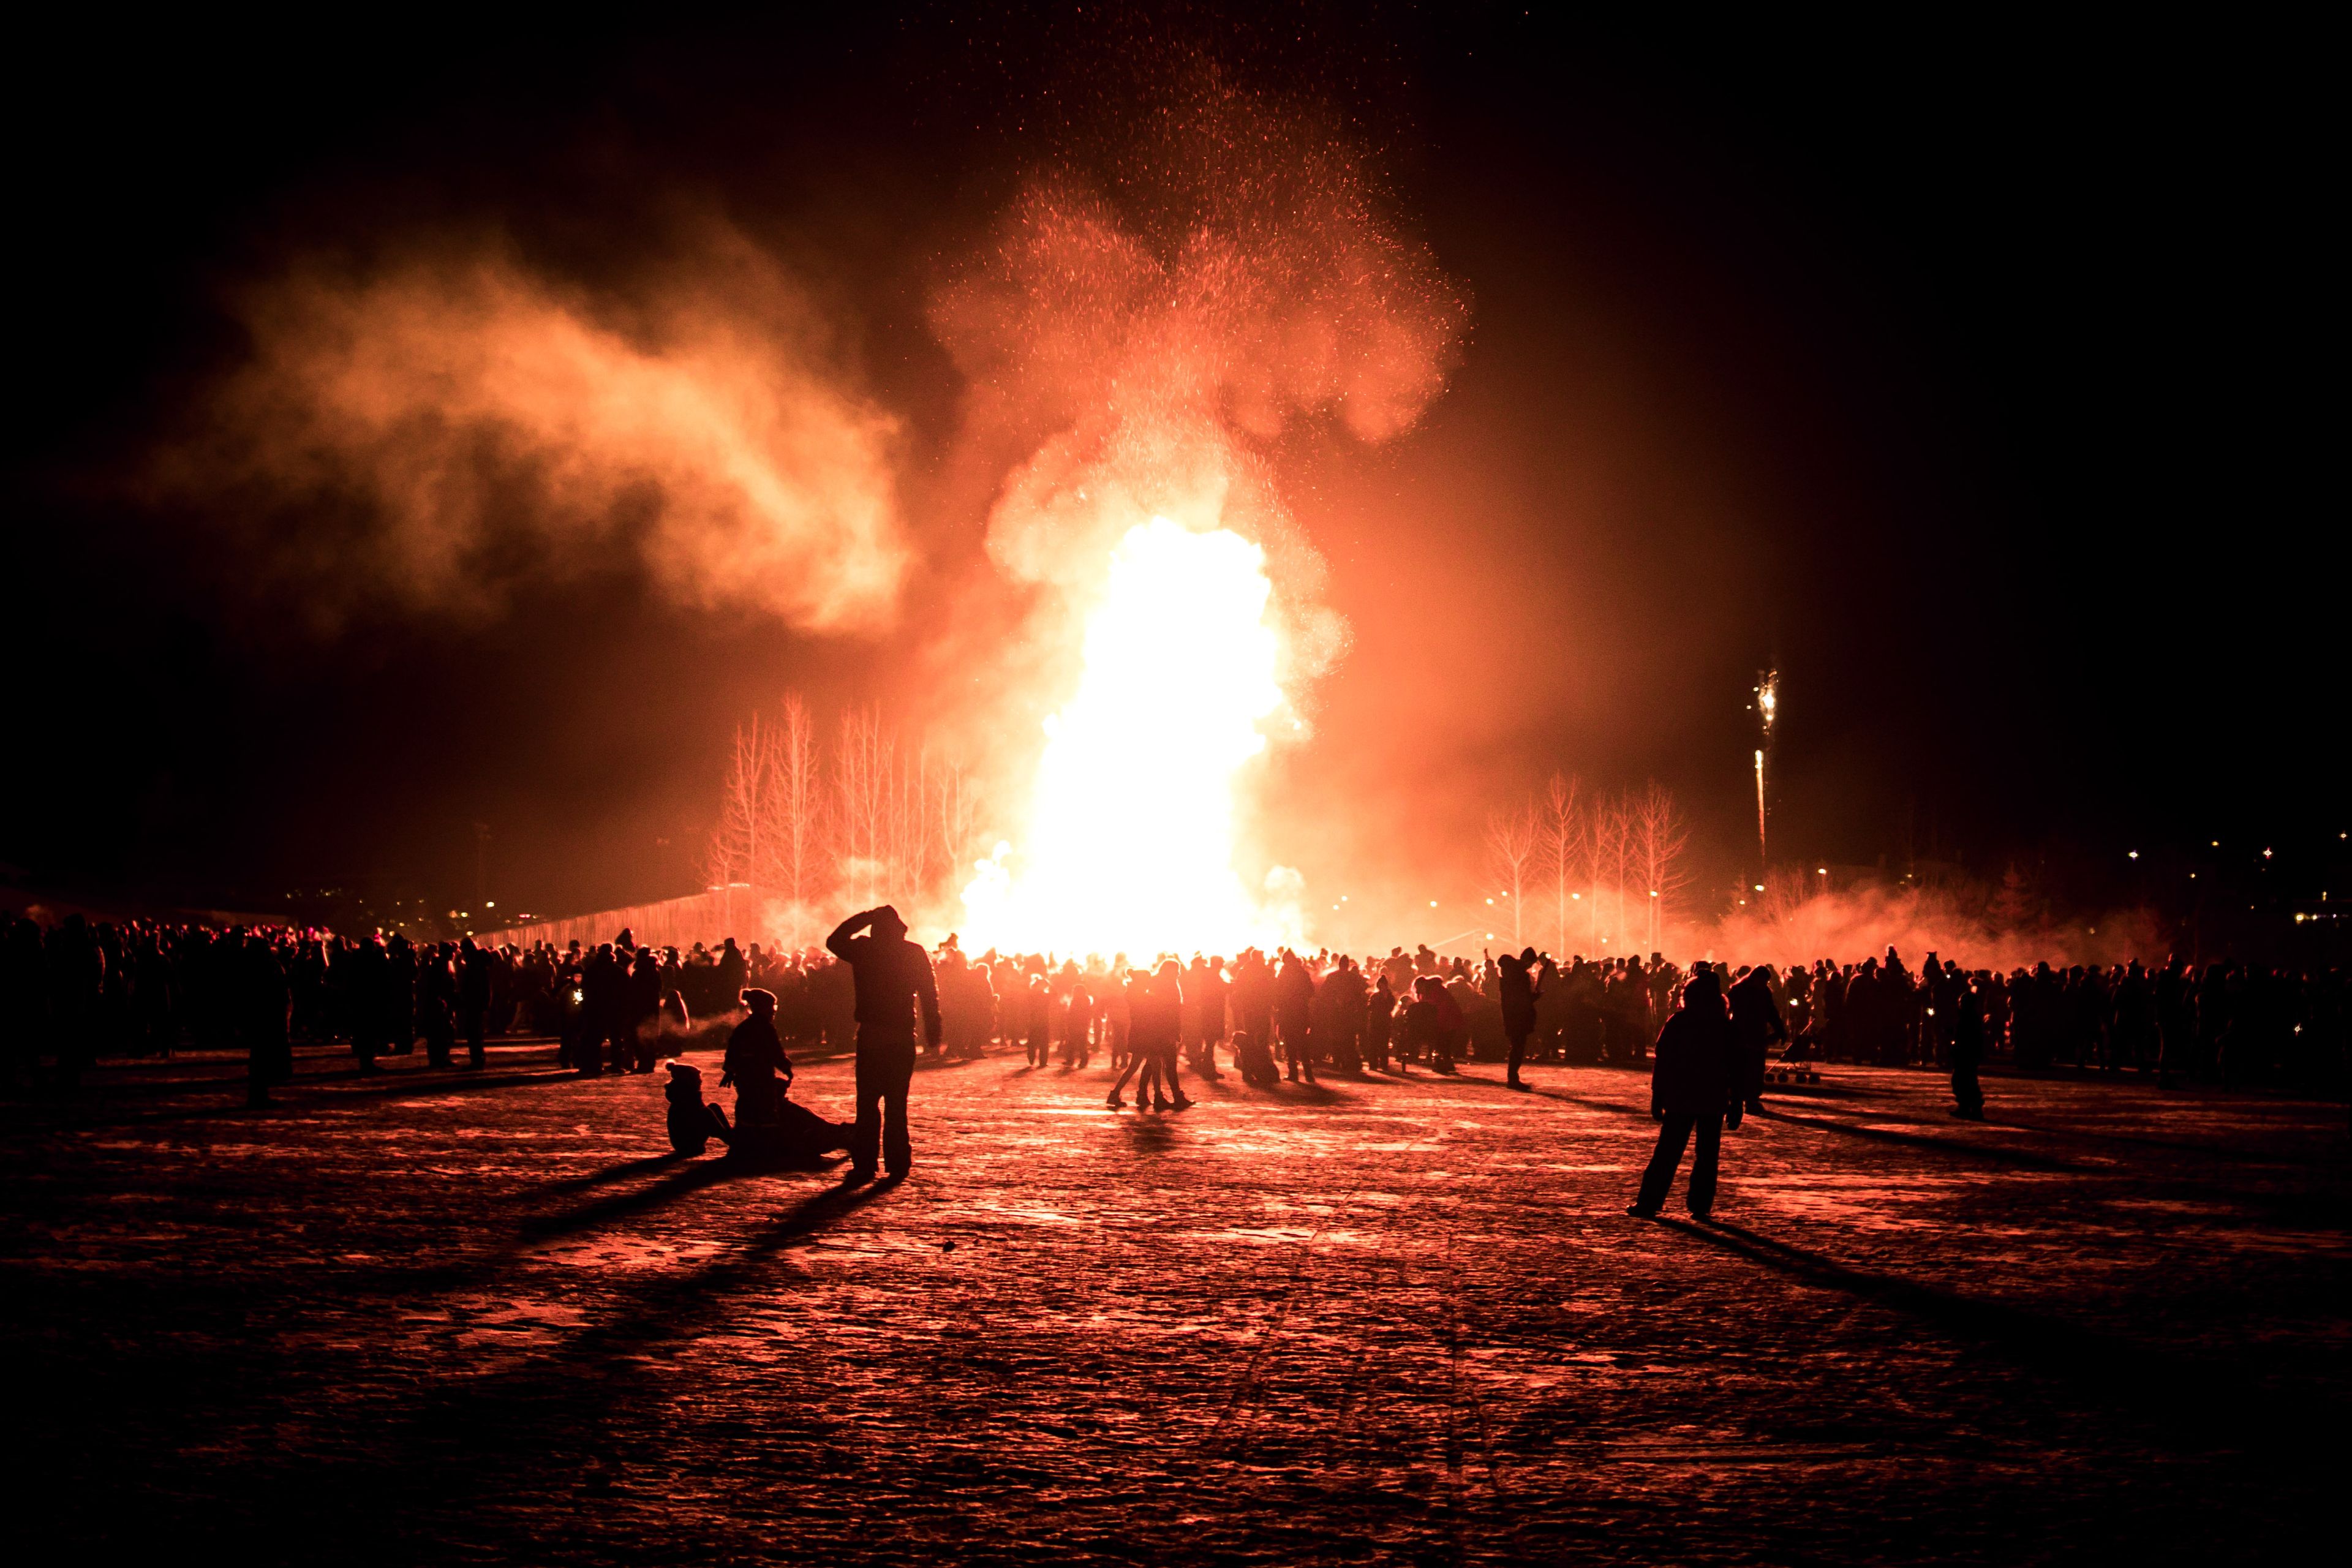 People celebrating New Year's Eve in Iceland with new year's fireworks and bonfires